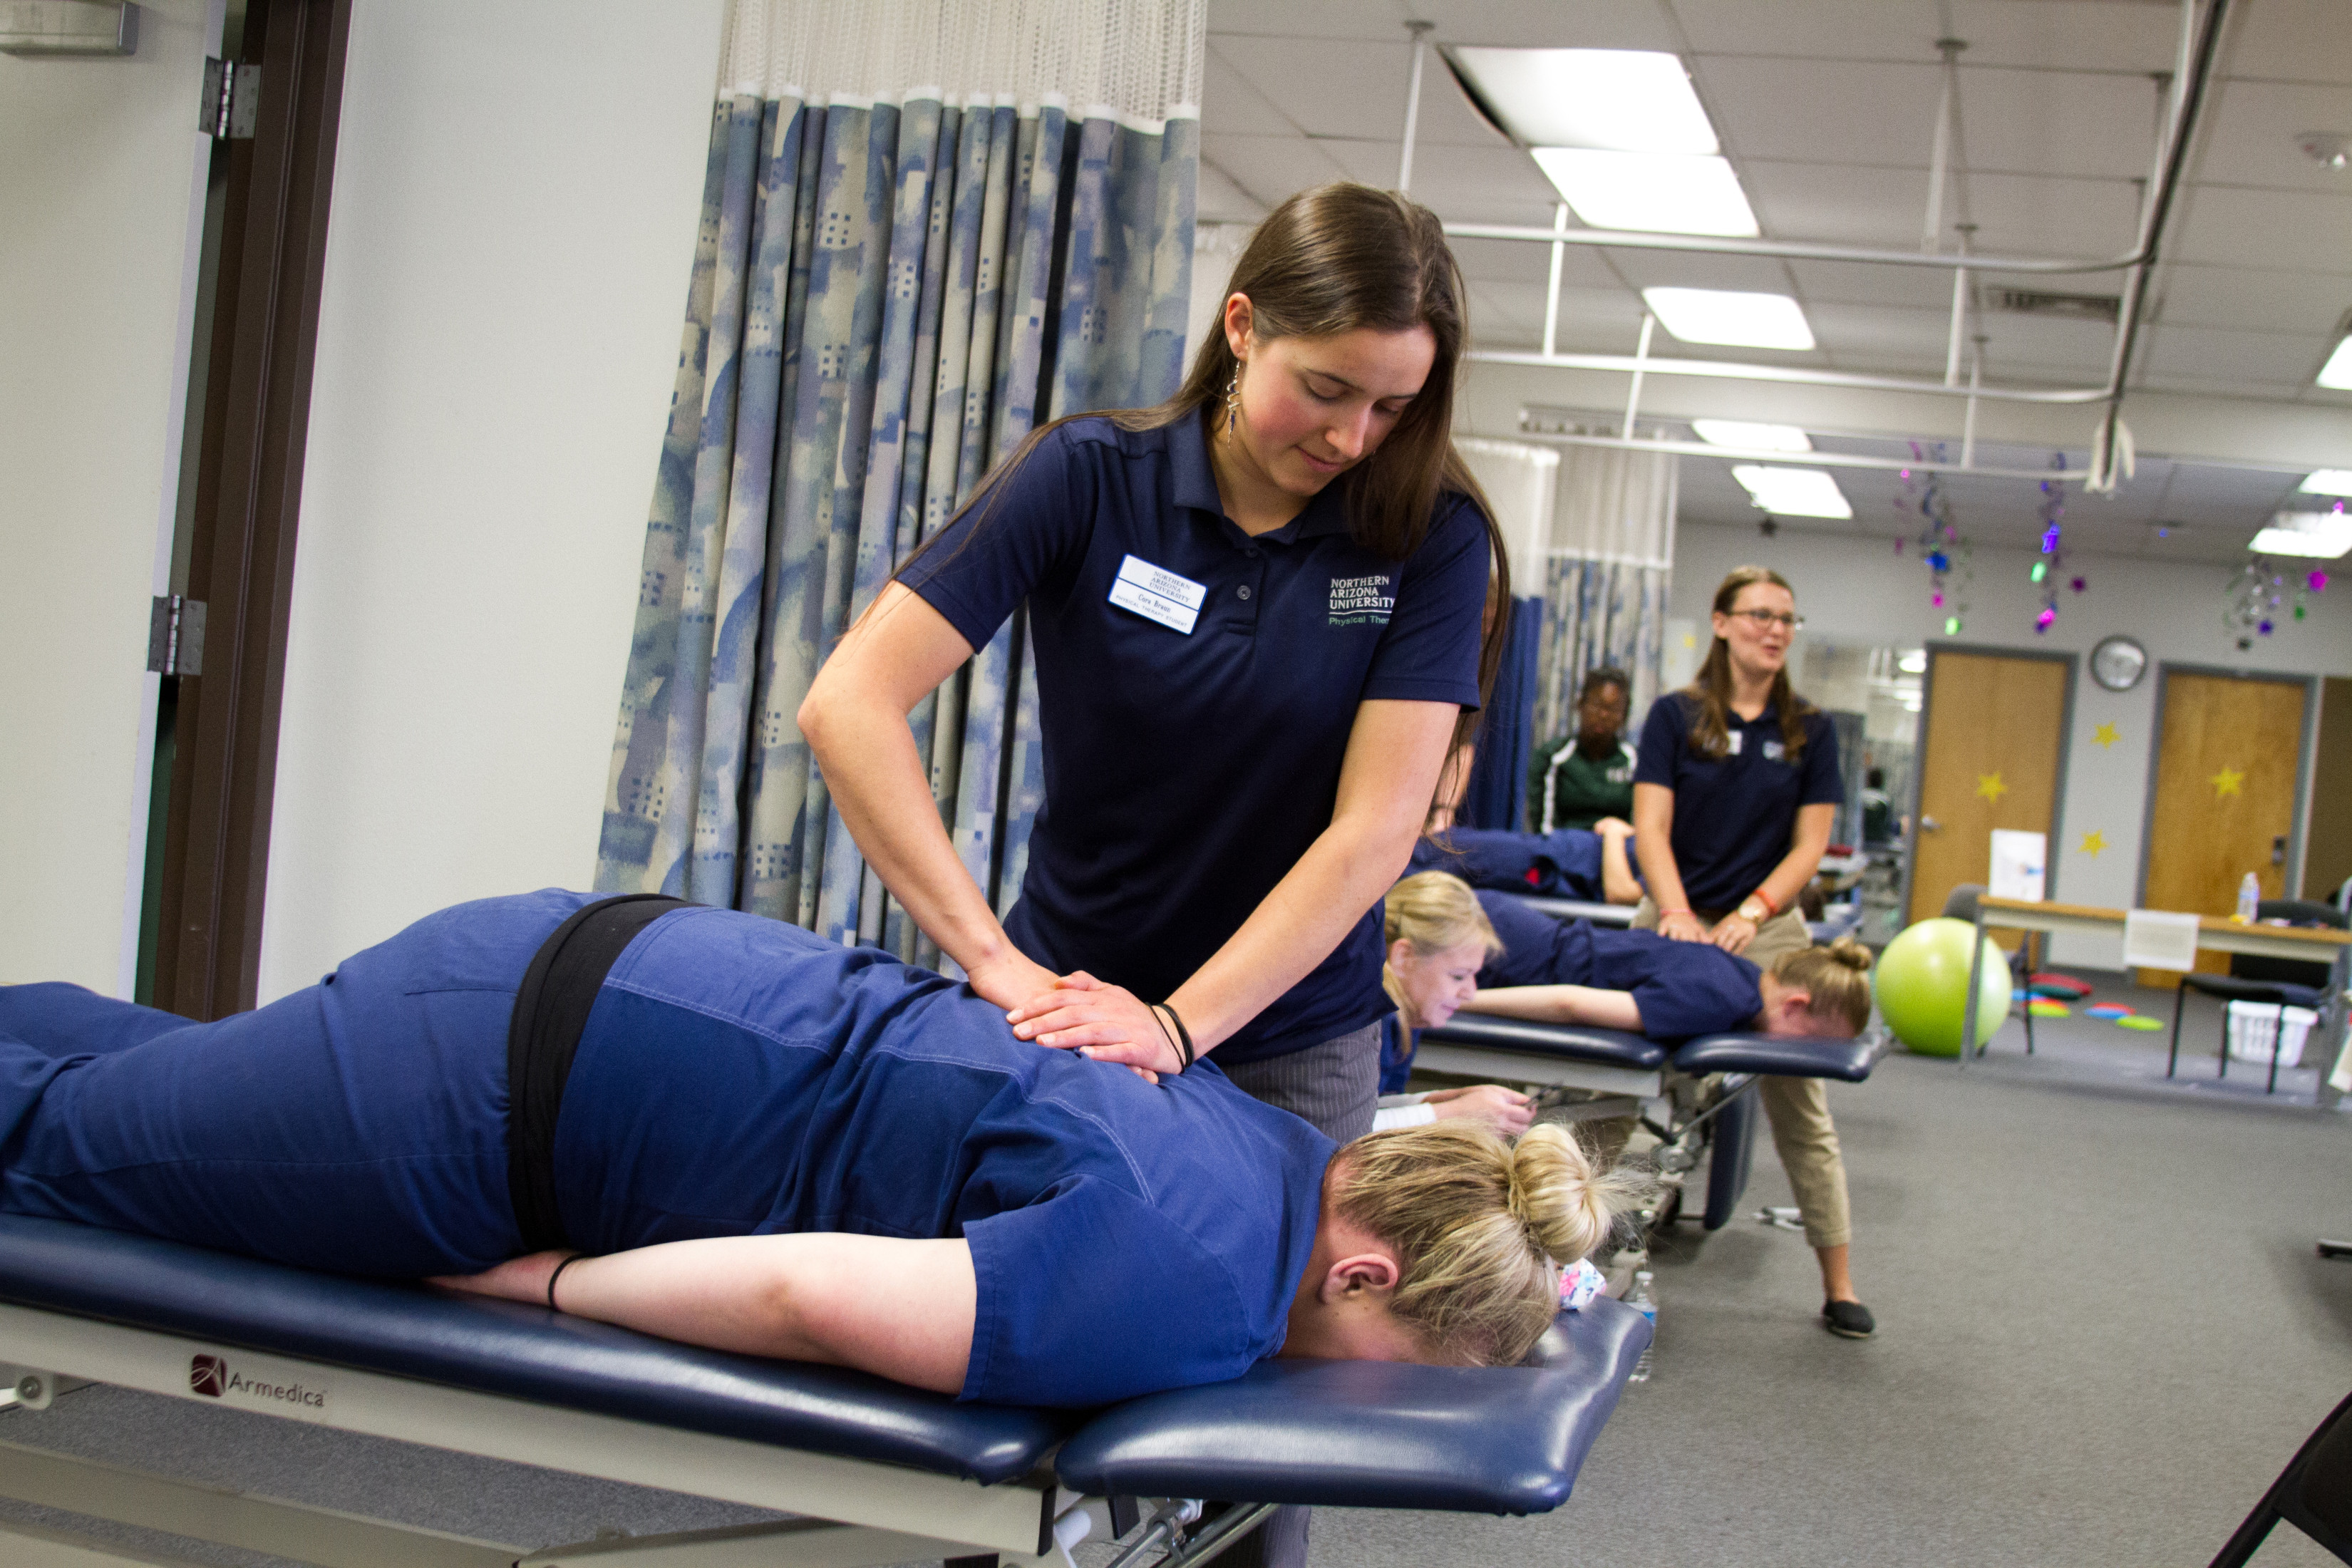 A physical therapy student rubs a patient’s back.